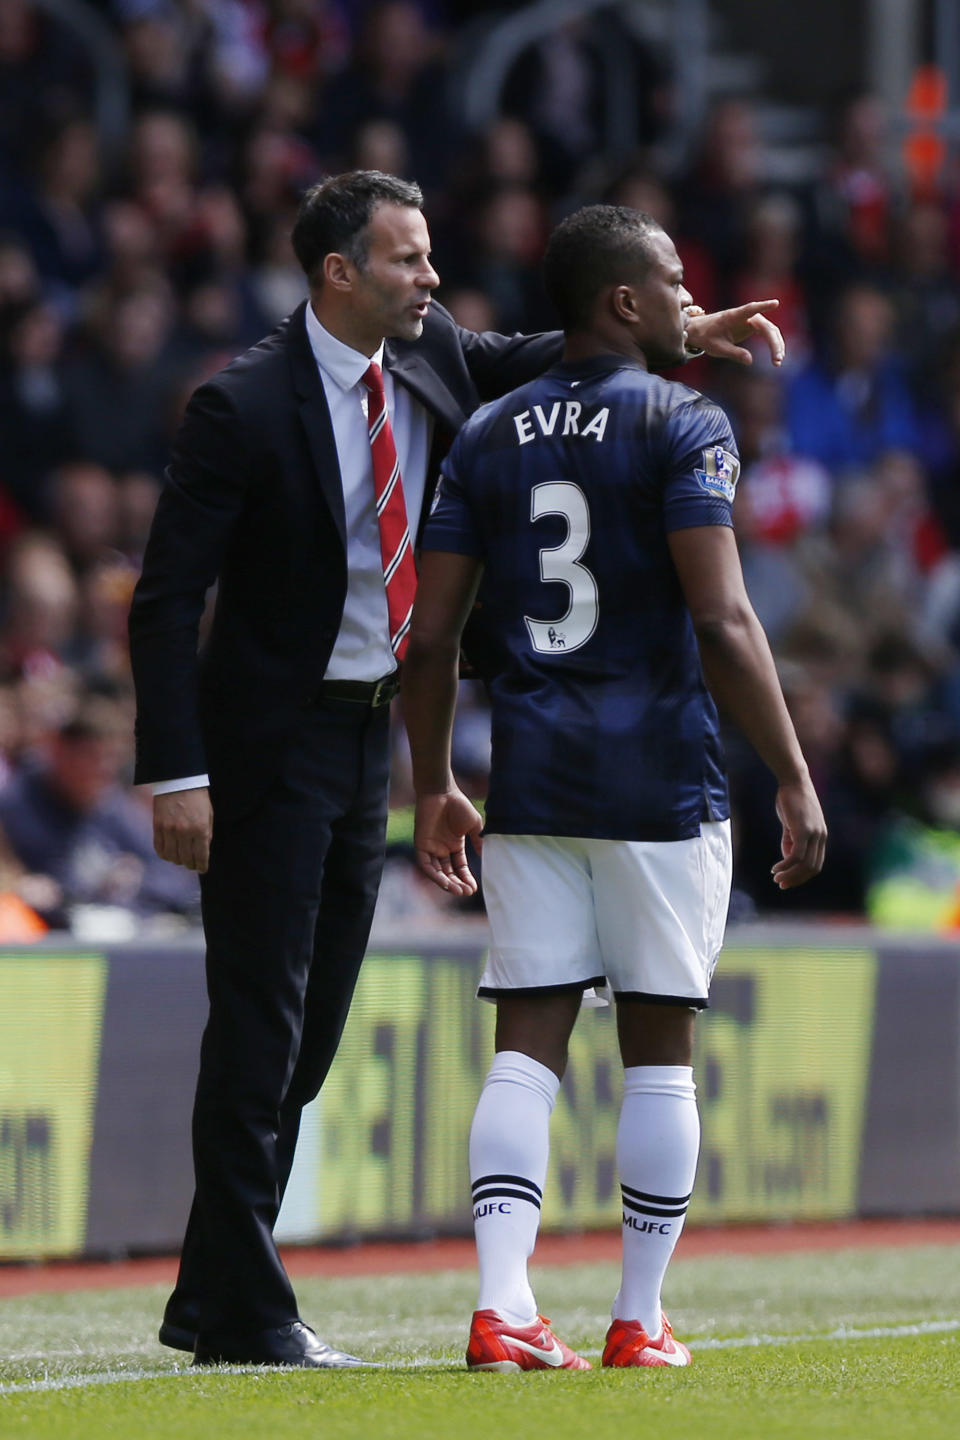 Manchester United's interim manager Ryan Giggs, left, instructs Patrice Evra during their English Premier League soccer match against Southampton at St Mary's stadium, Southampton, England, Sunday, May 11, 2014. (AP Photo/Sang Tan)